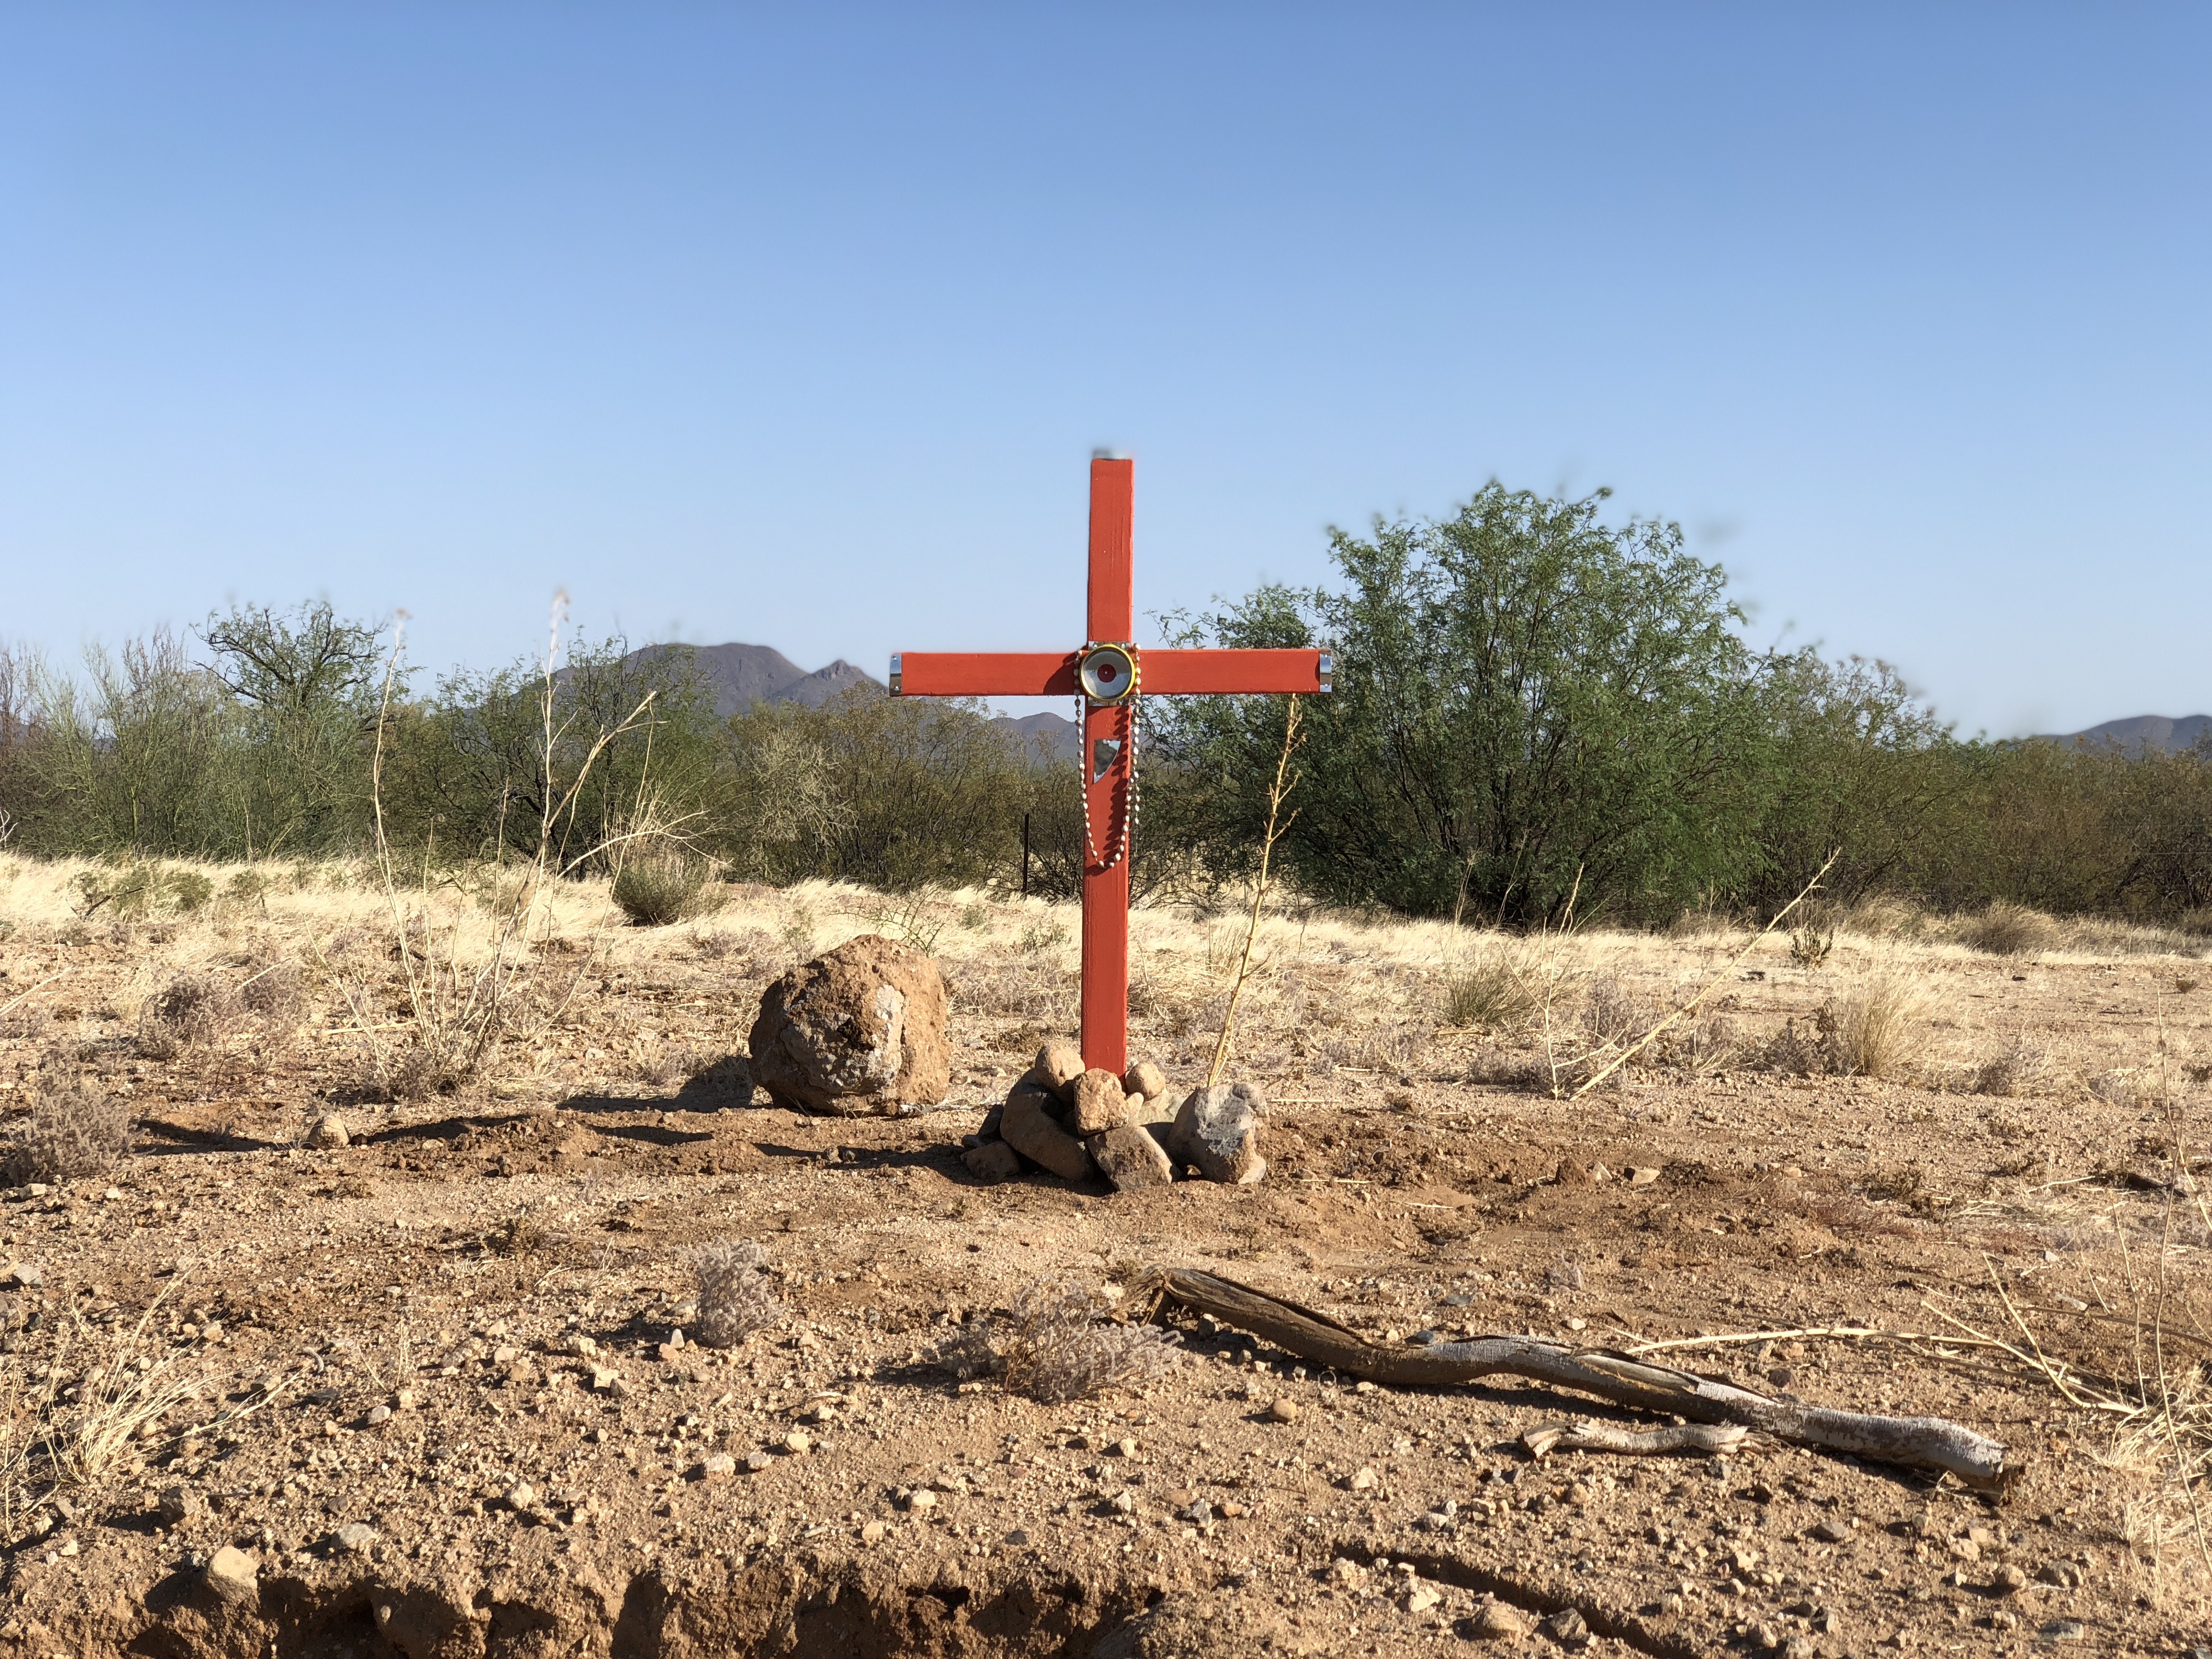 "A cross in the desert, marking the spot where a deceased migrant's body had been found."